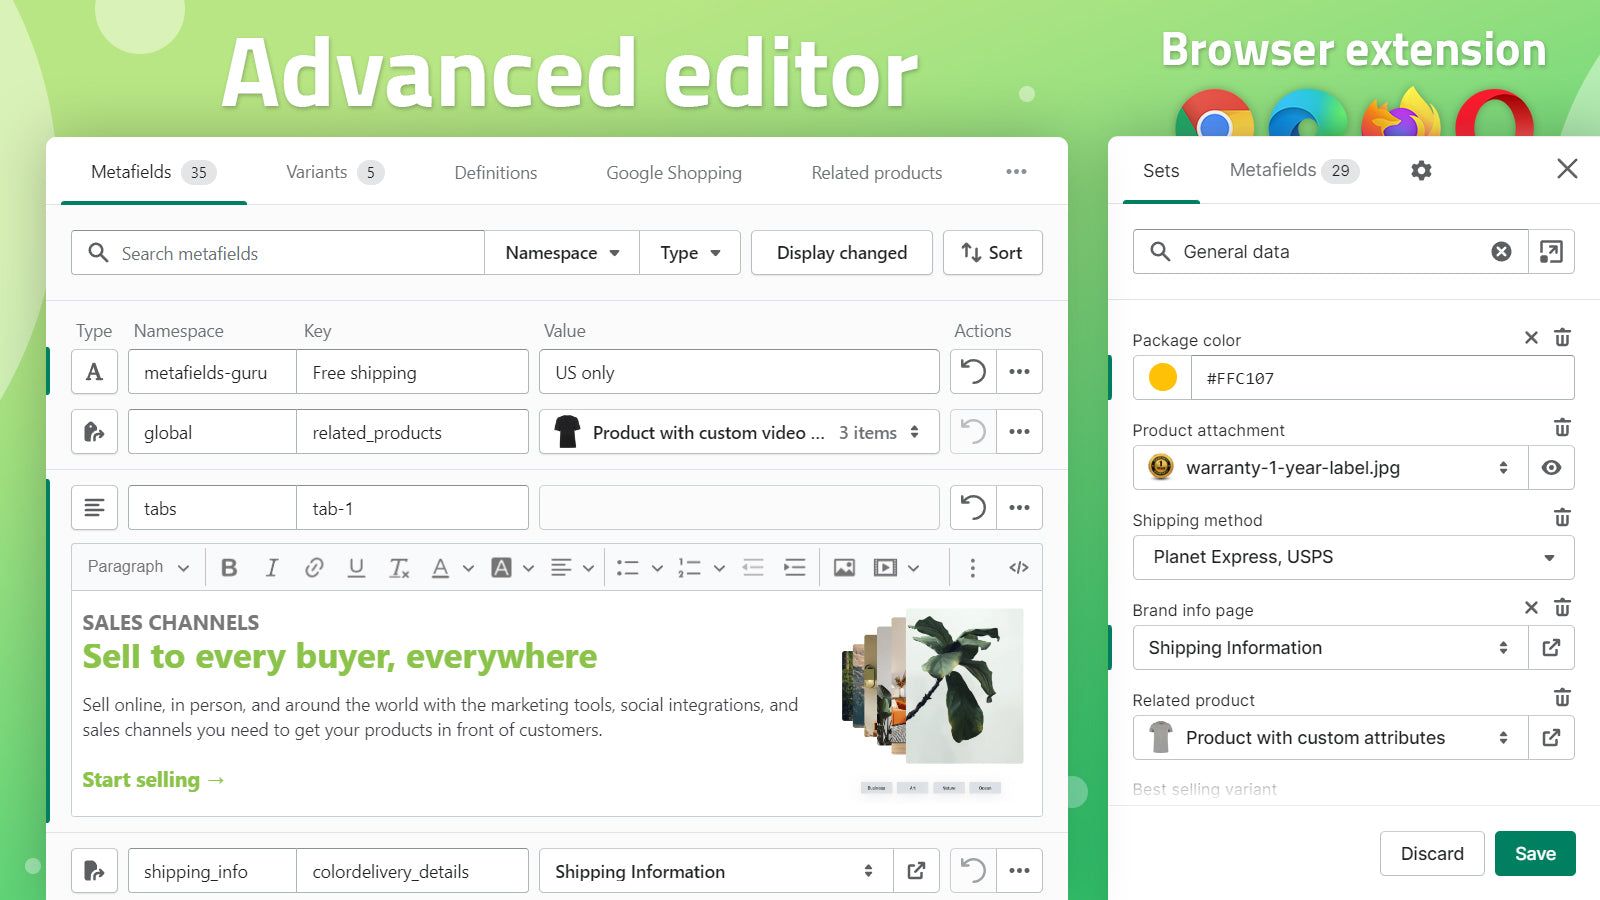 Advanced editor and browser extensicon